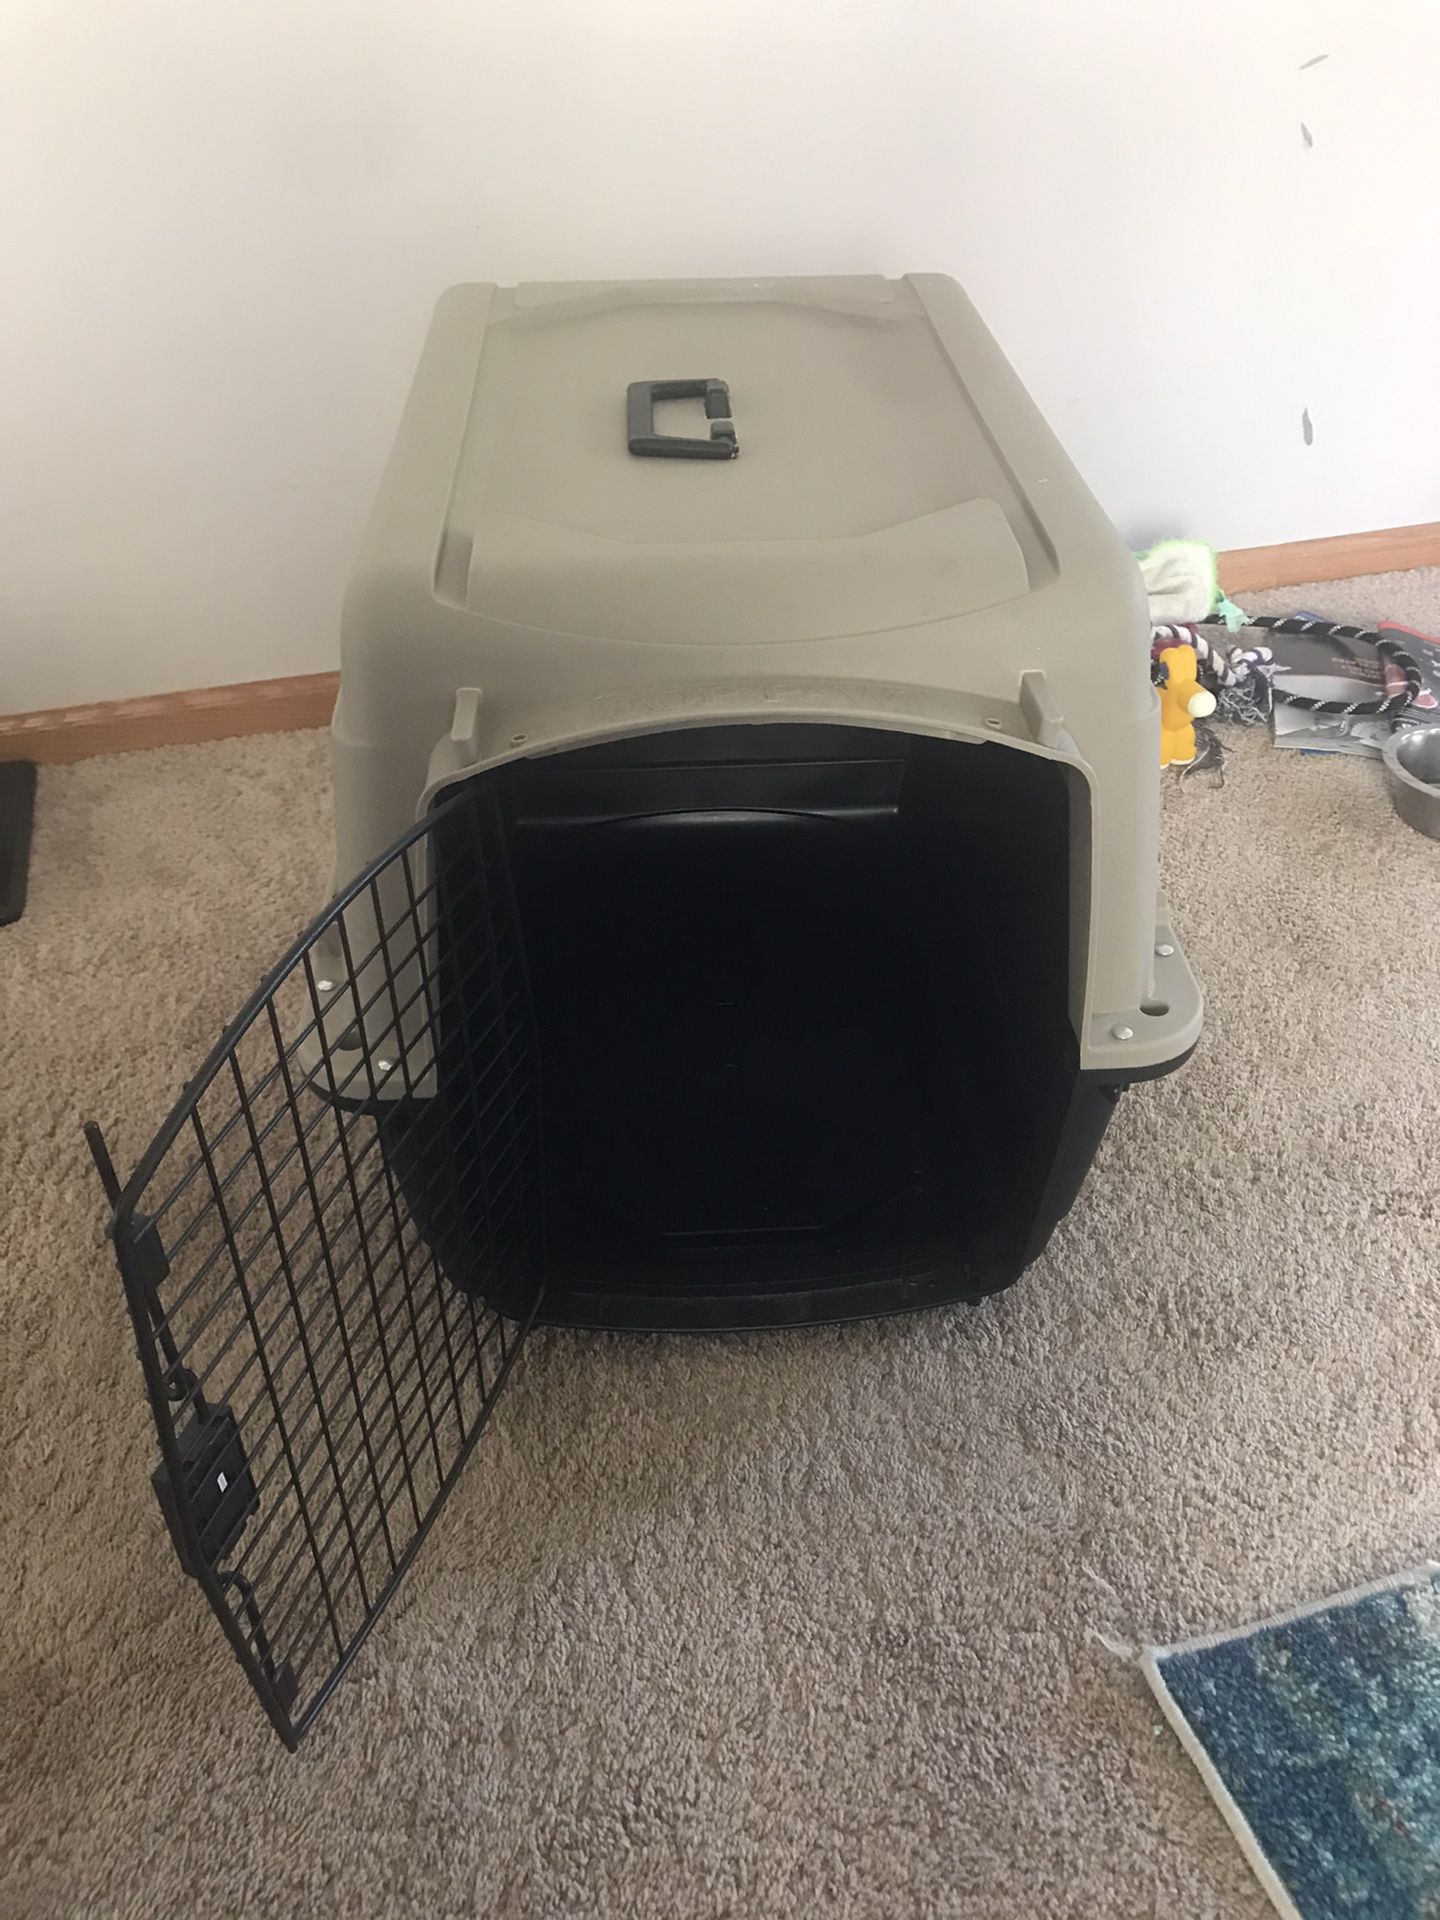 Dog kennel Crate 28”